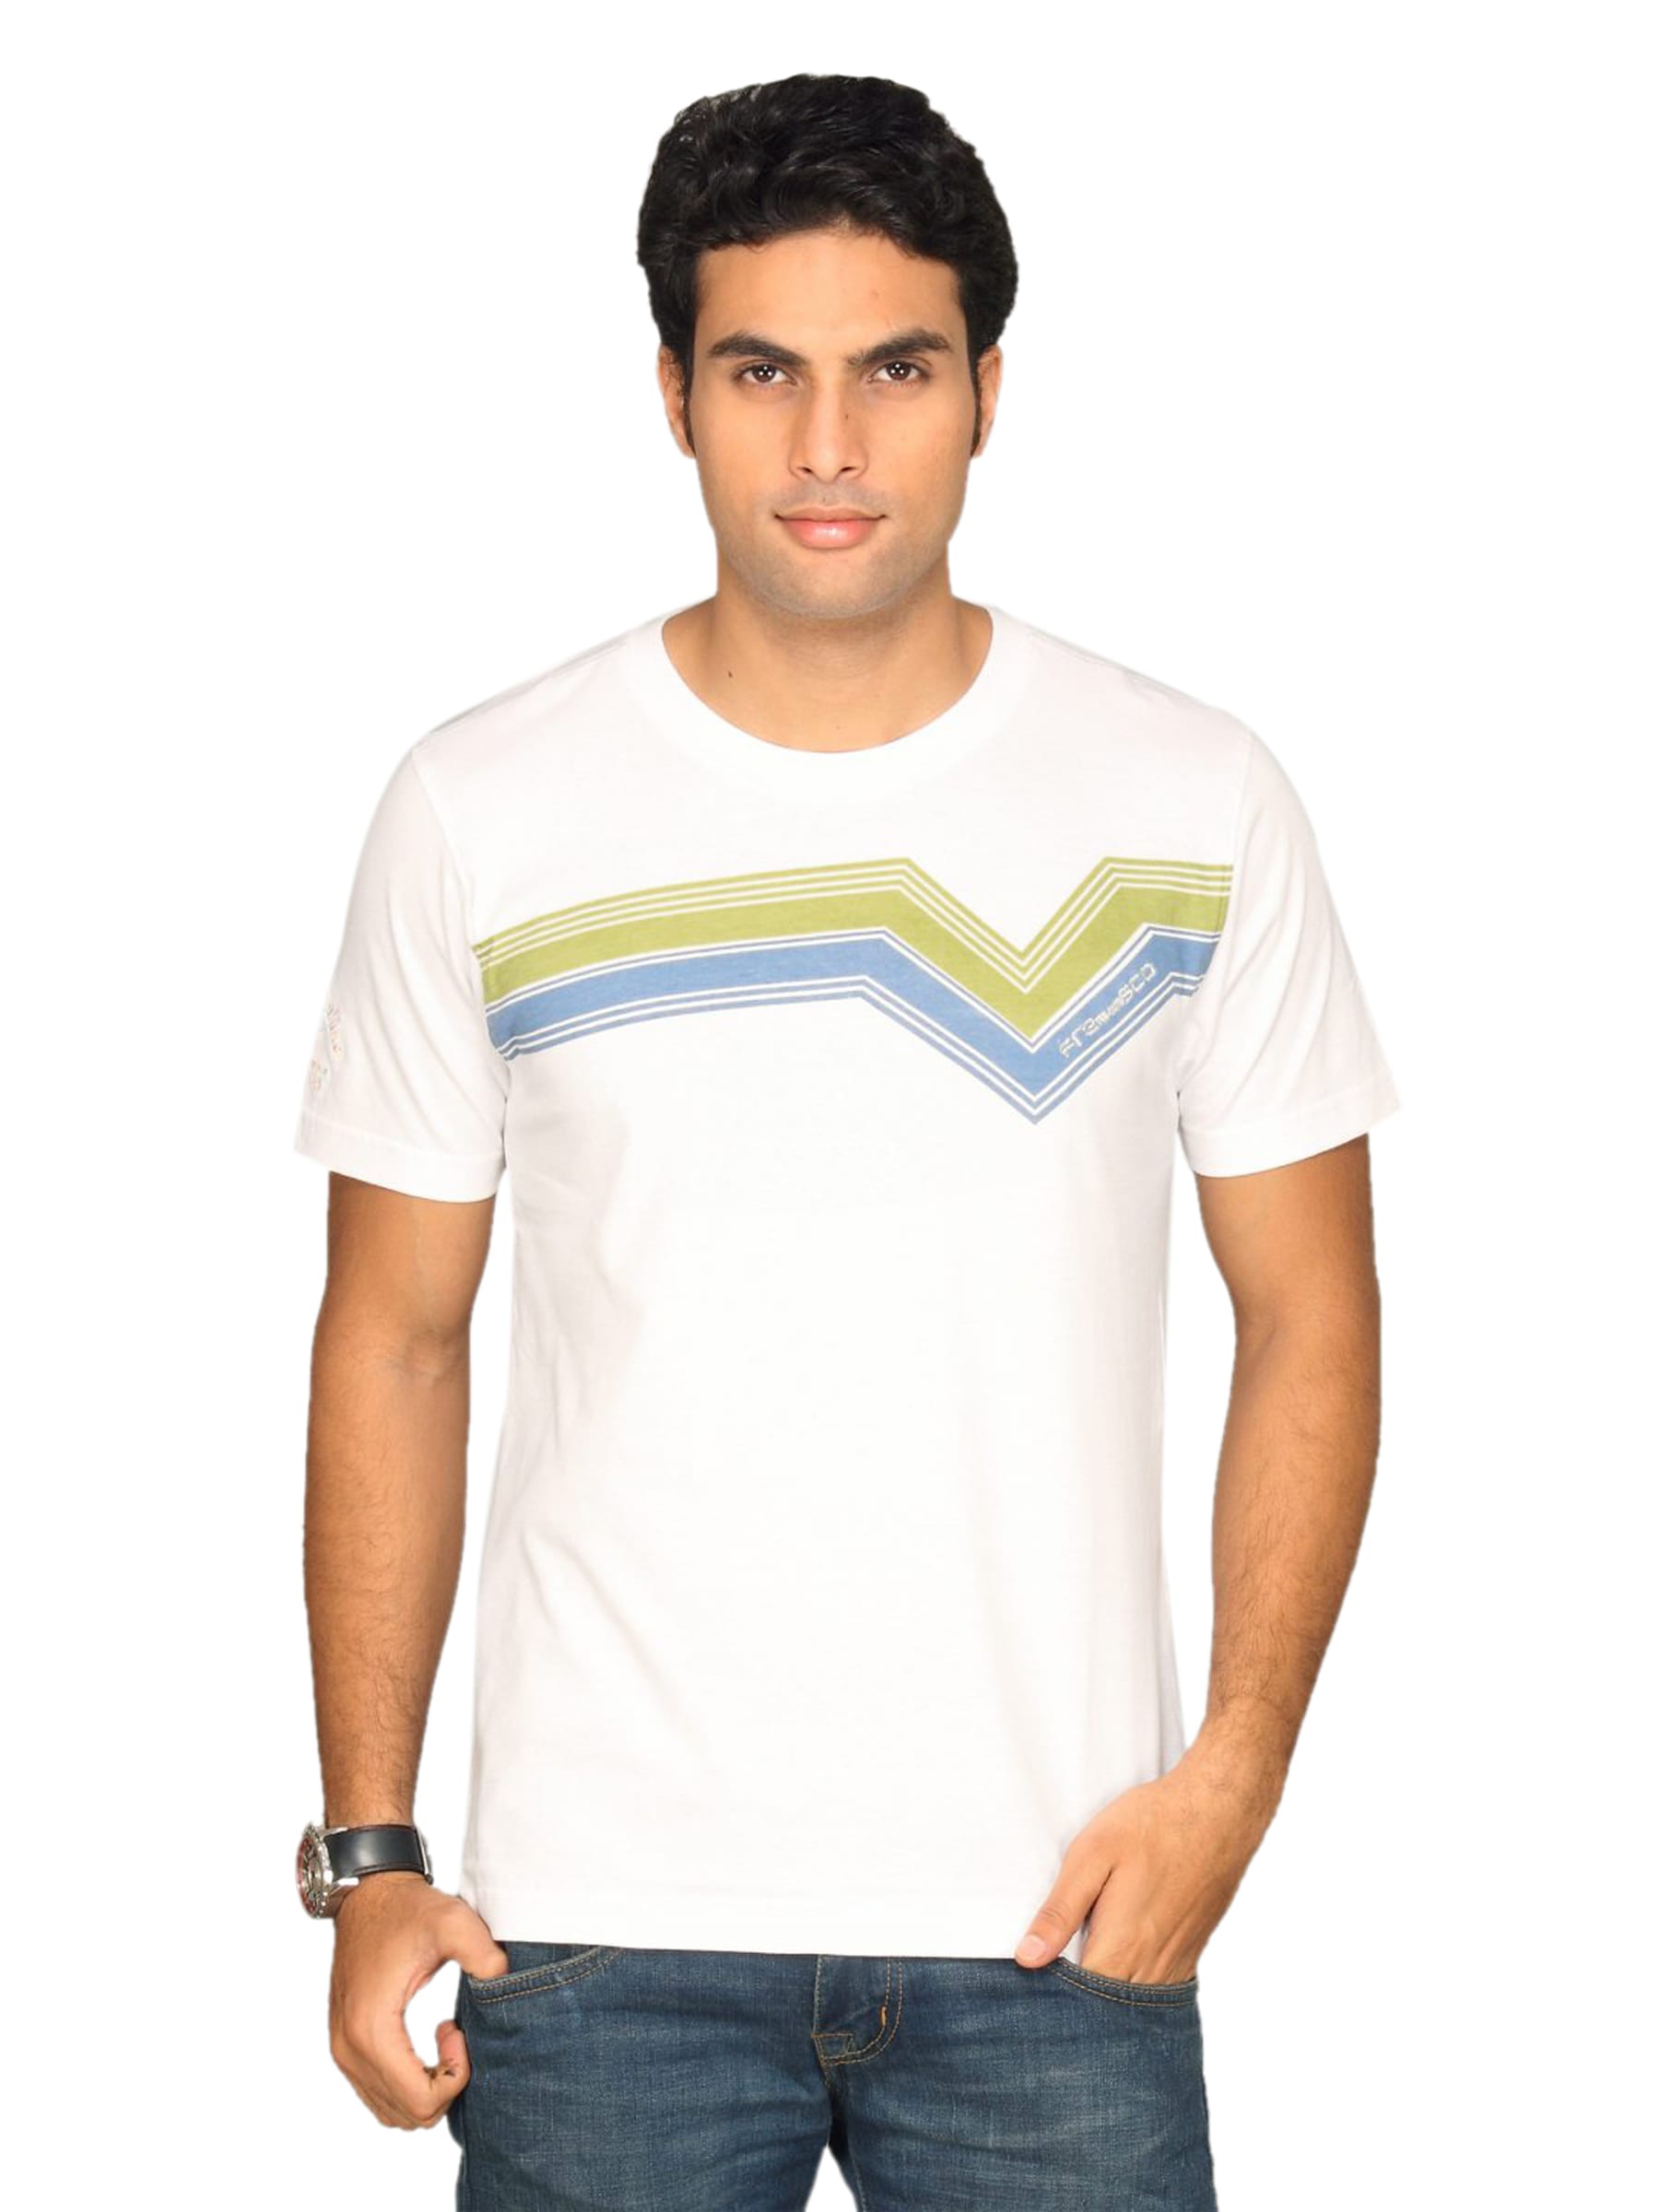 Classic Polo Men's White With Green Grey Stripes T-shirt